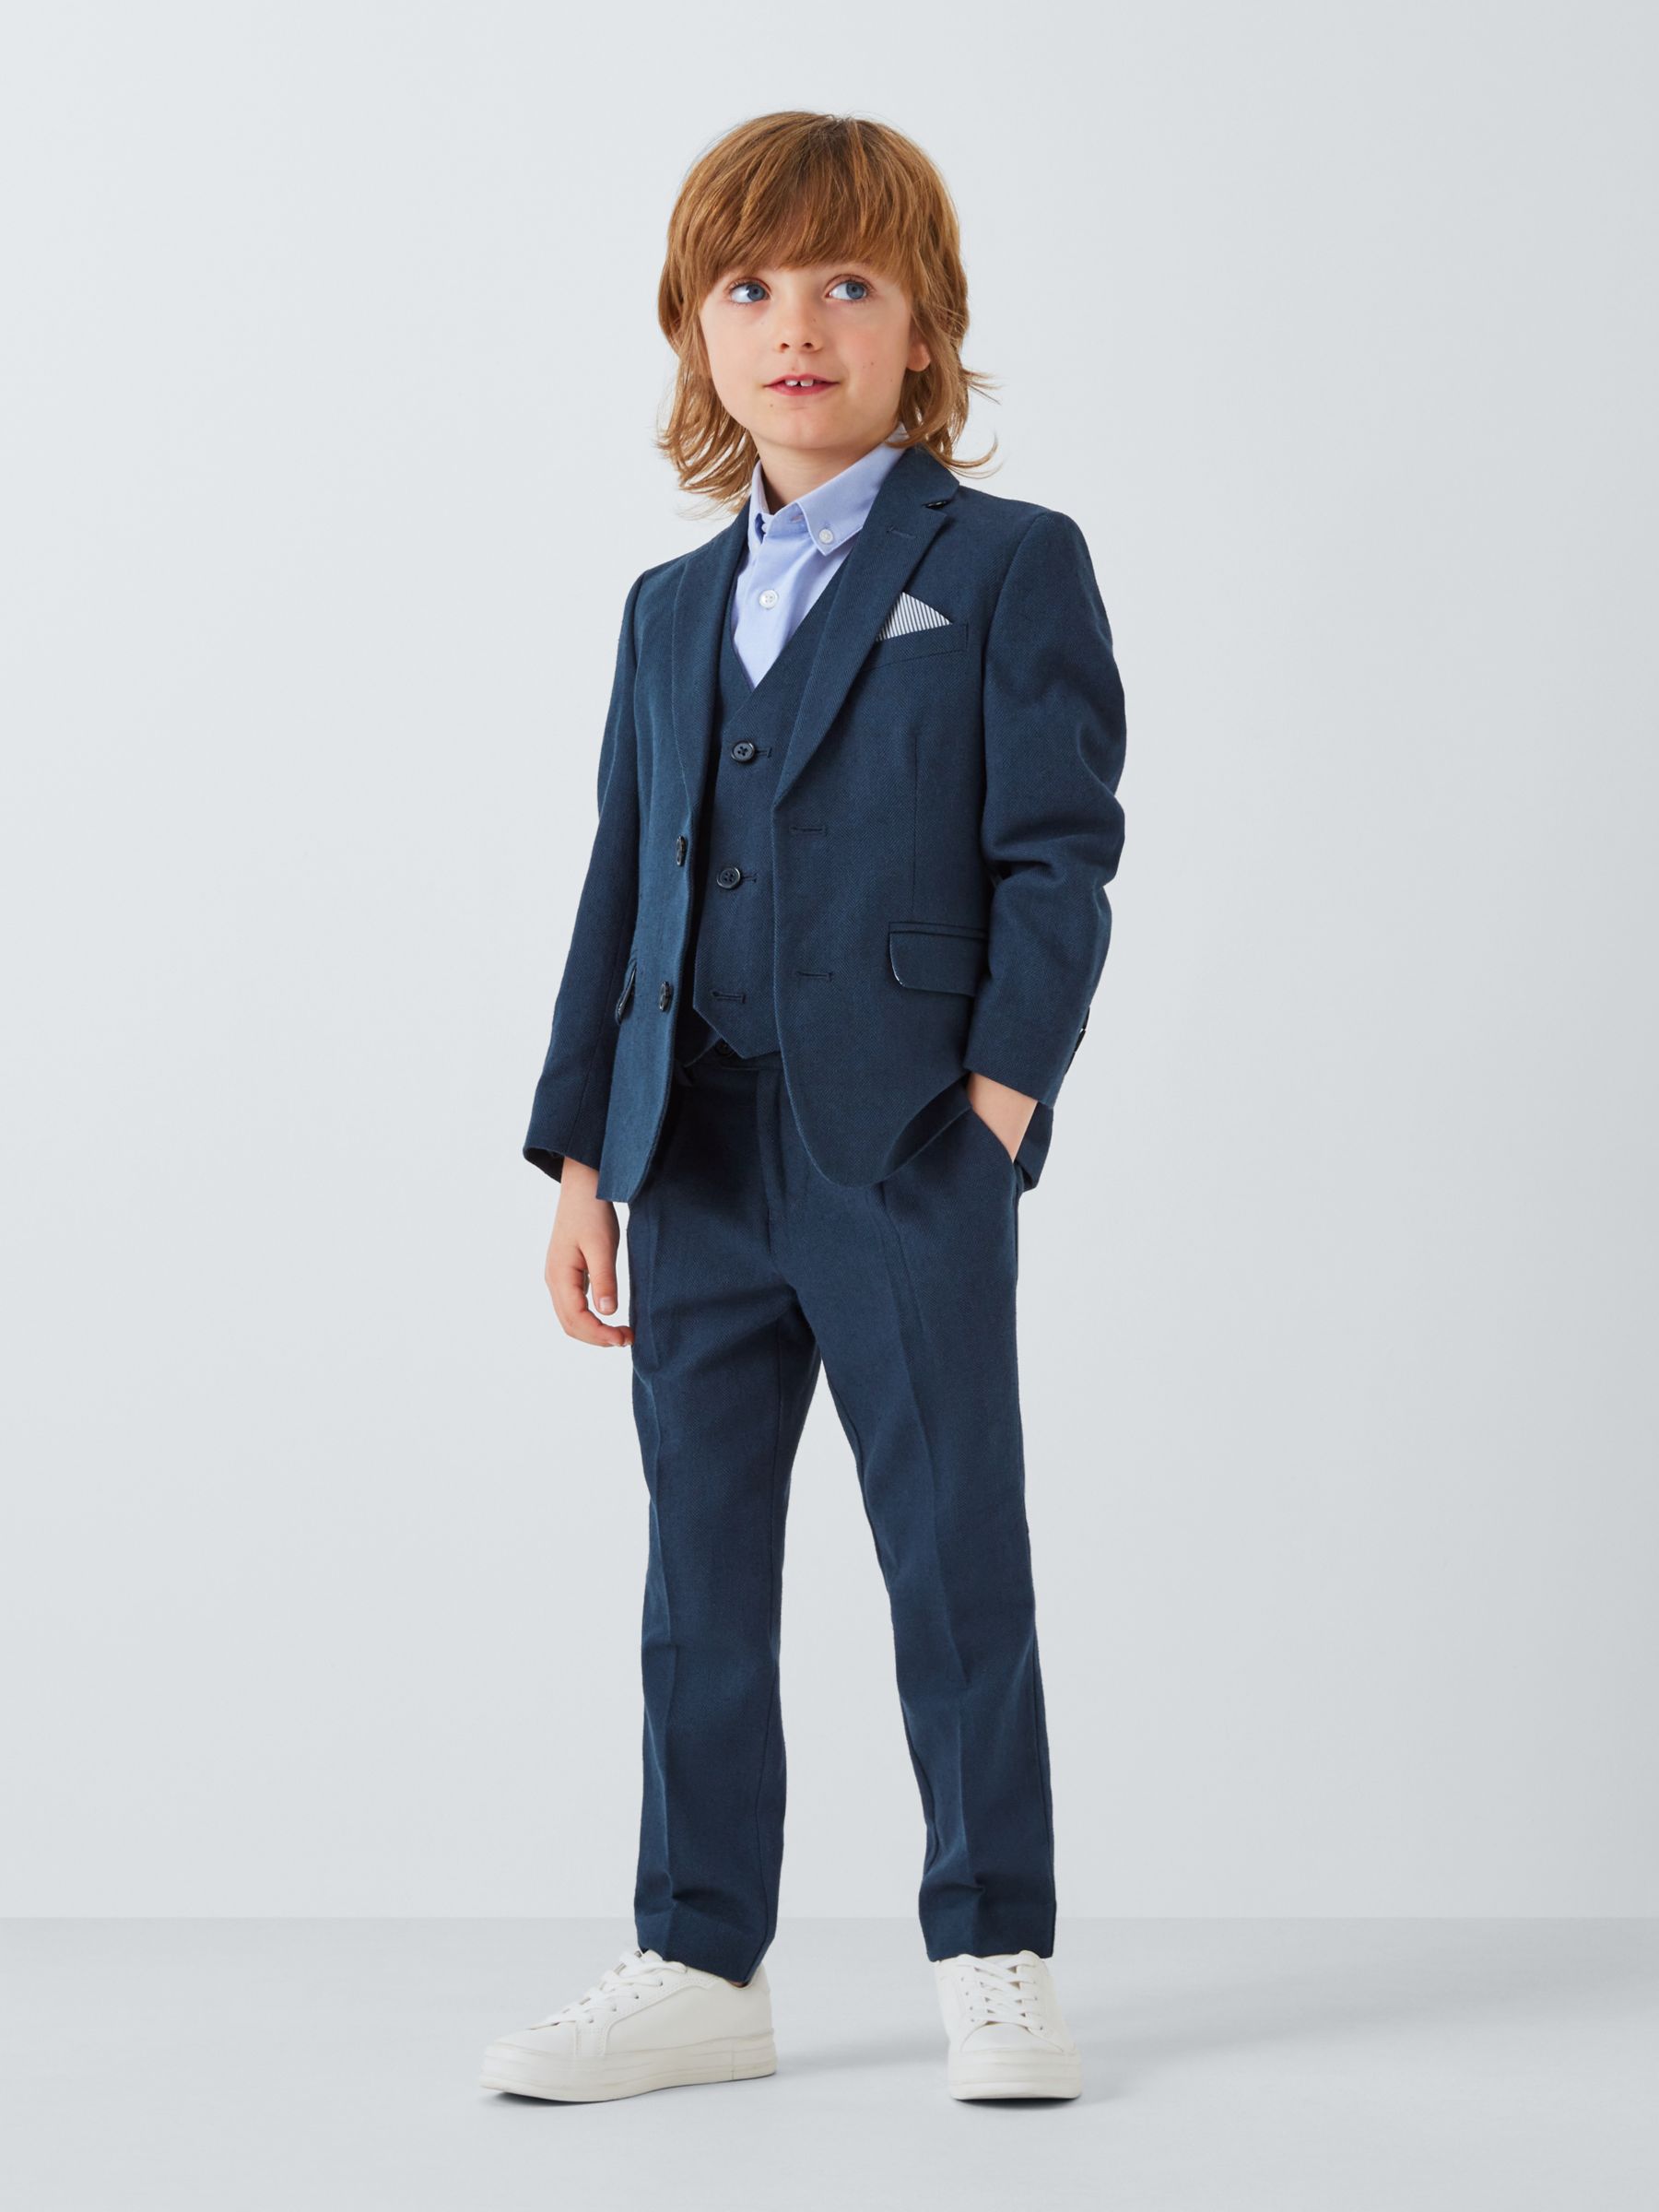 John Lewis Heirloom Collection Kids' Linen Blend Suit Trousers, Navy, 2 years